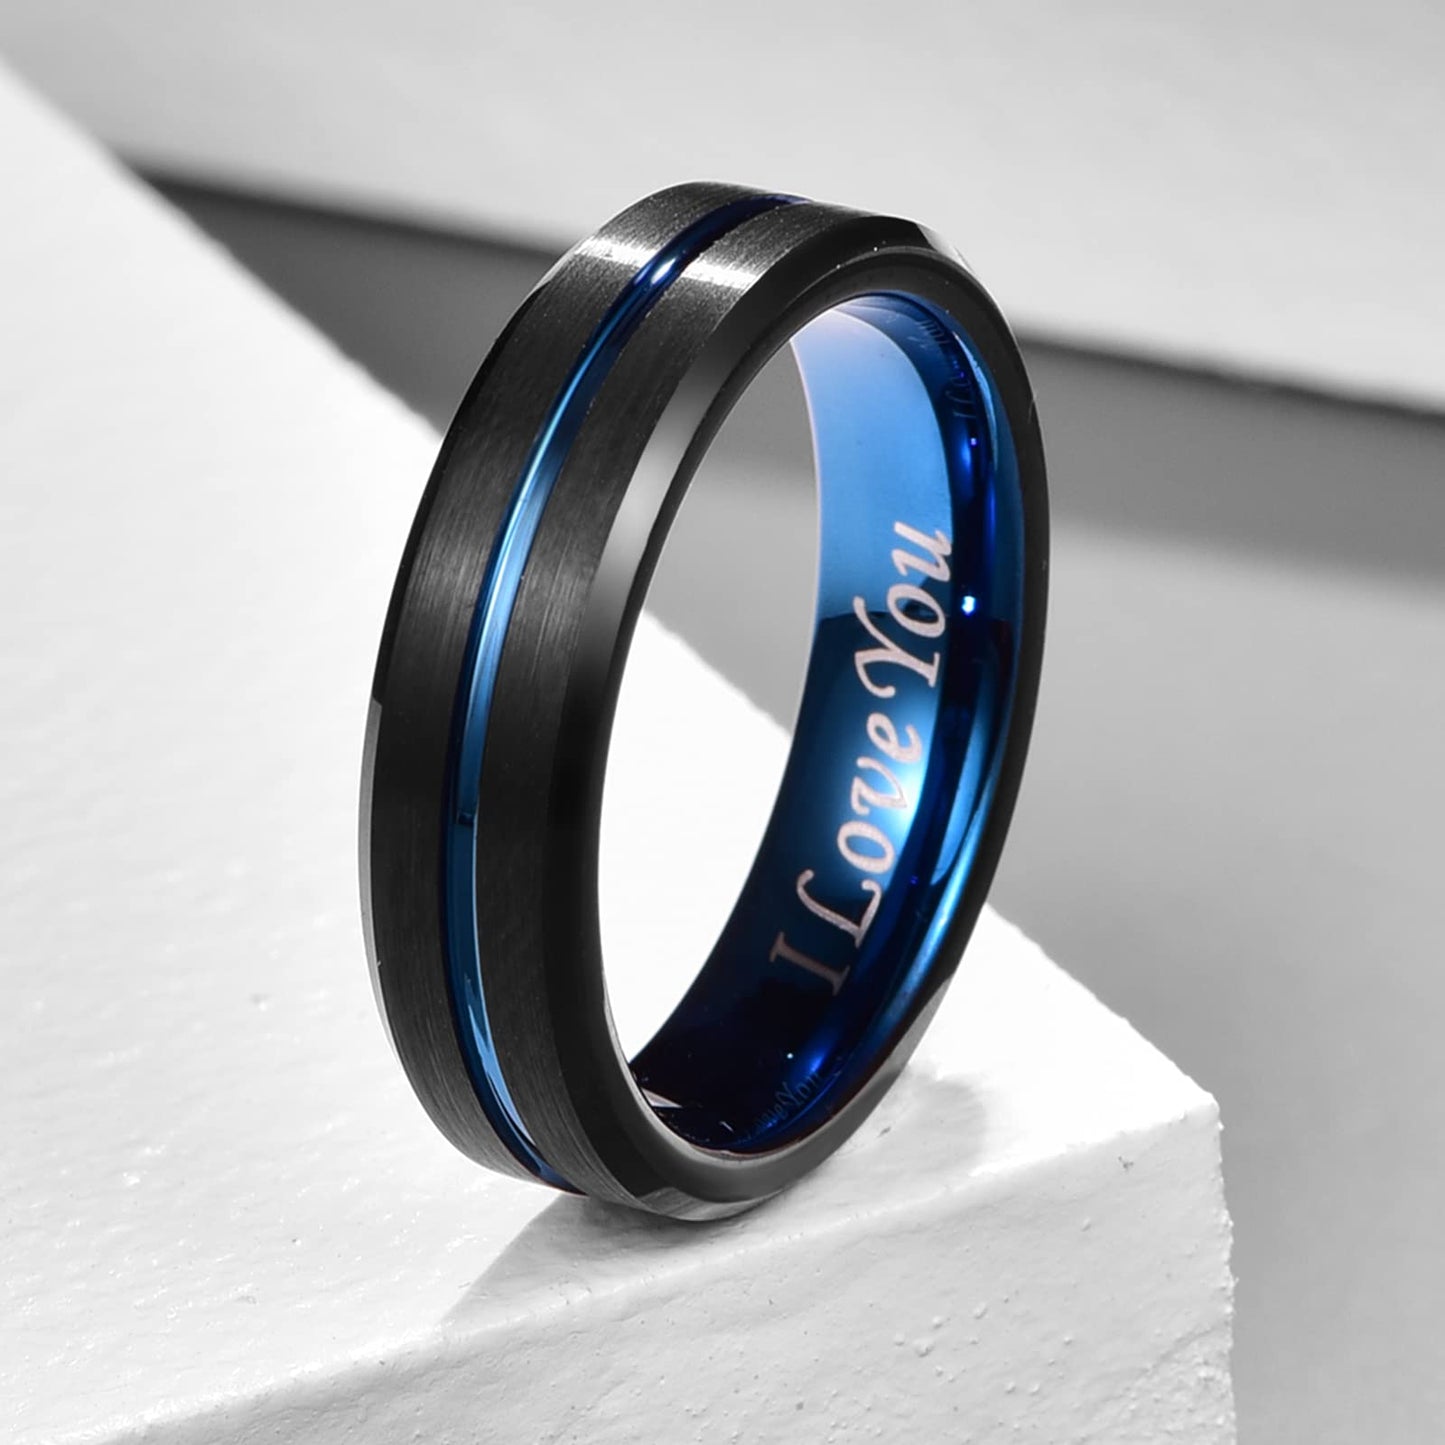 NUNCAD 6mm Black Band Rings for Men Women Blue Tungsten Carbide Wedding Engagement Band with Matte Finishe Size S